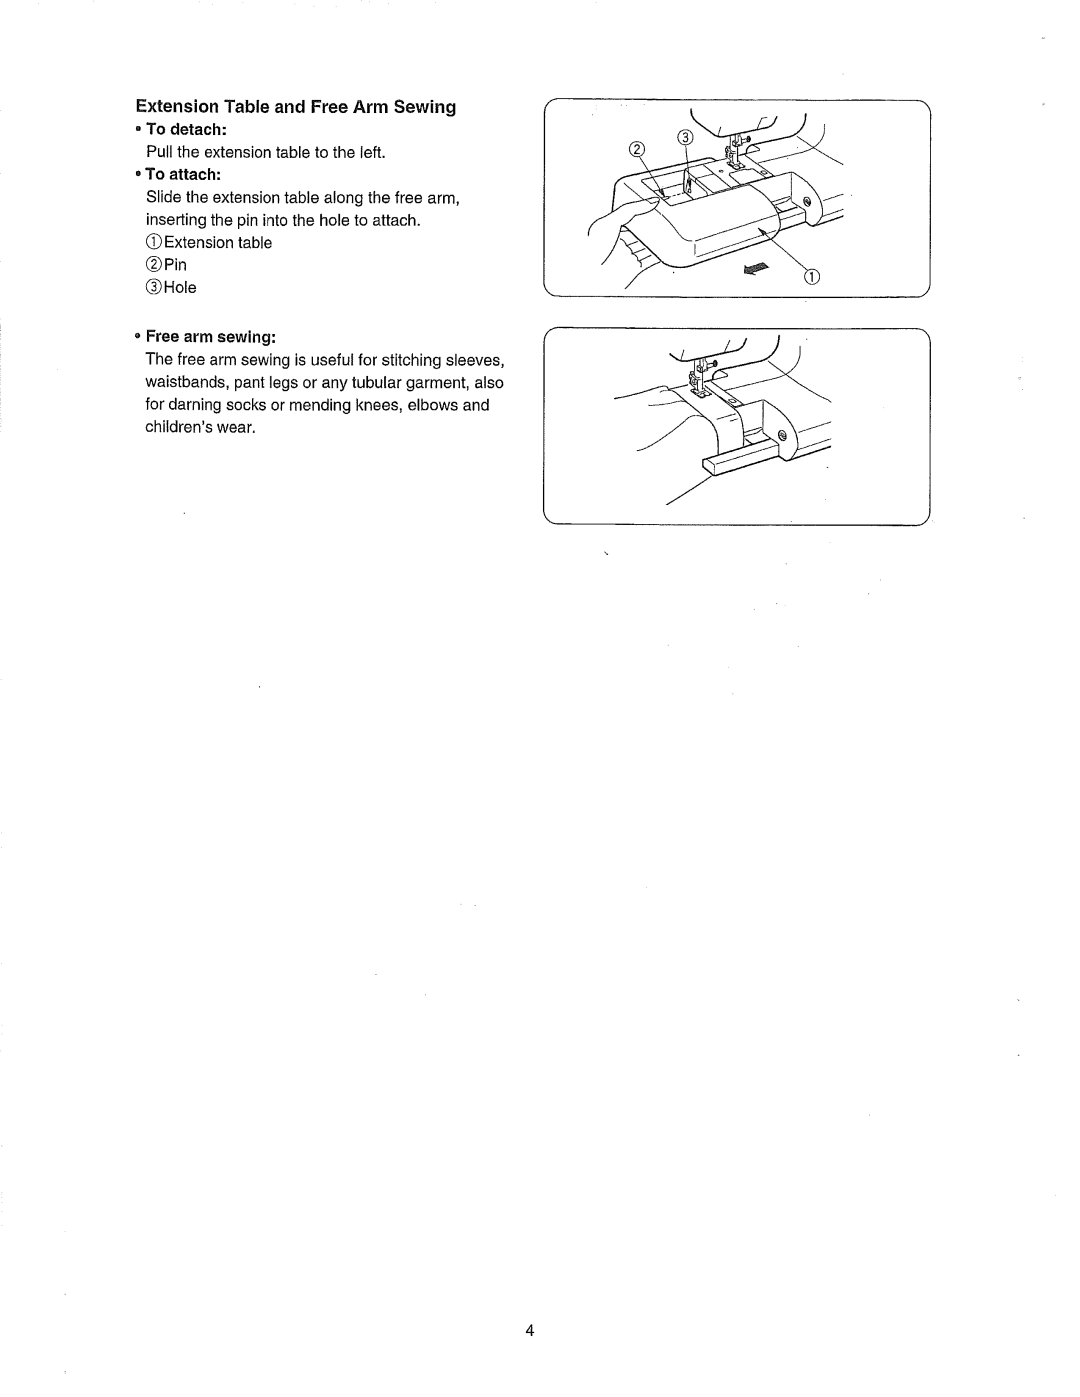 Janome 385.80802 owner manual Extension Table and Free Arm Sewing To detach, Free arm sewing 